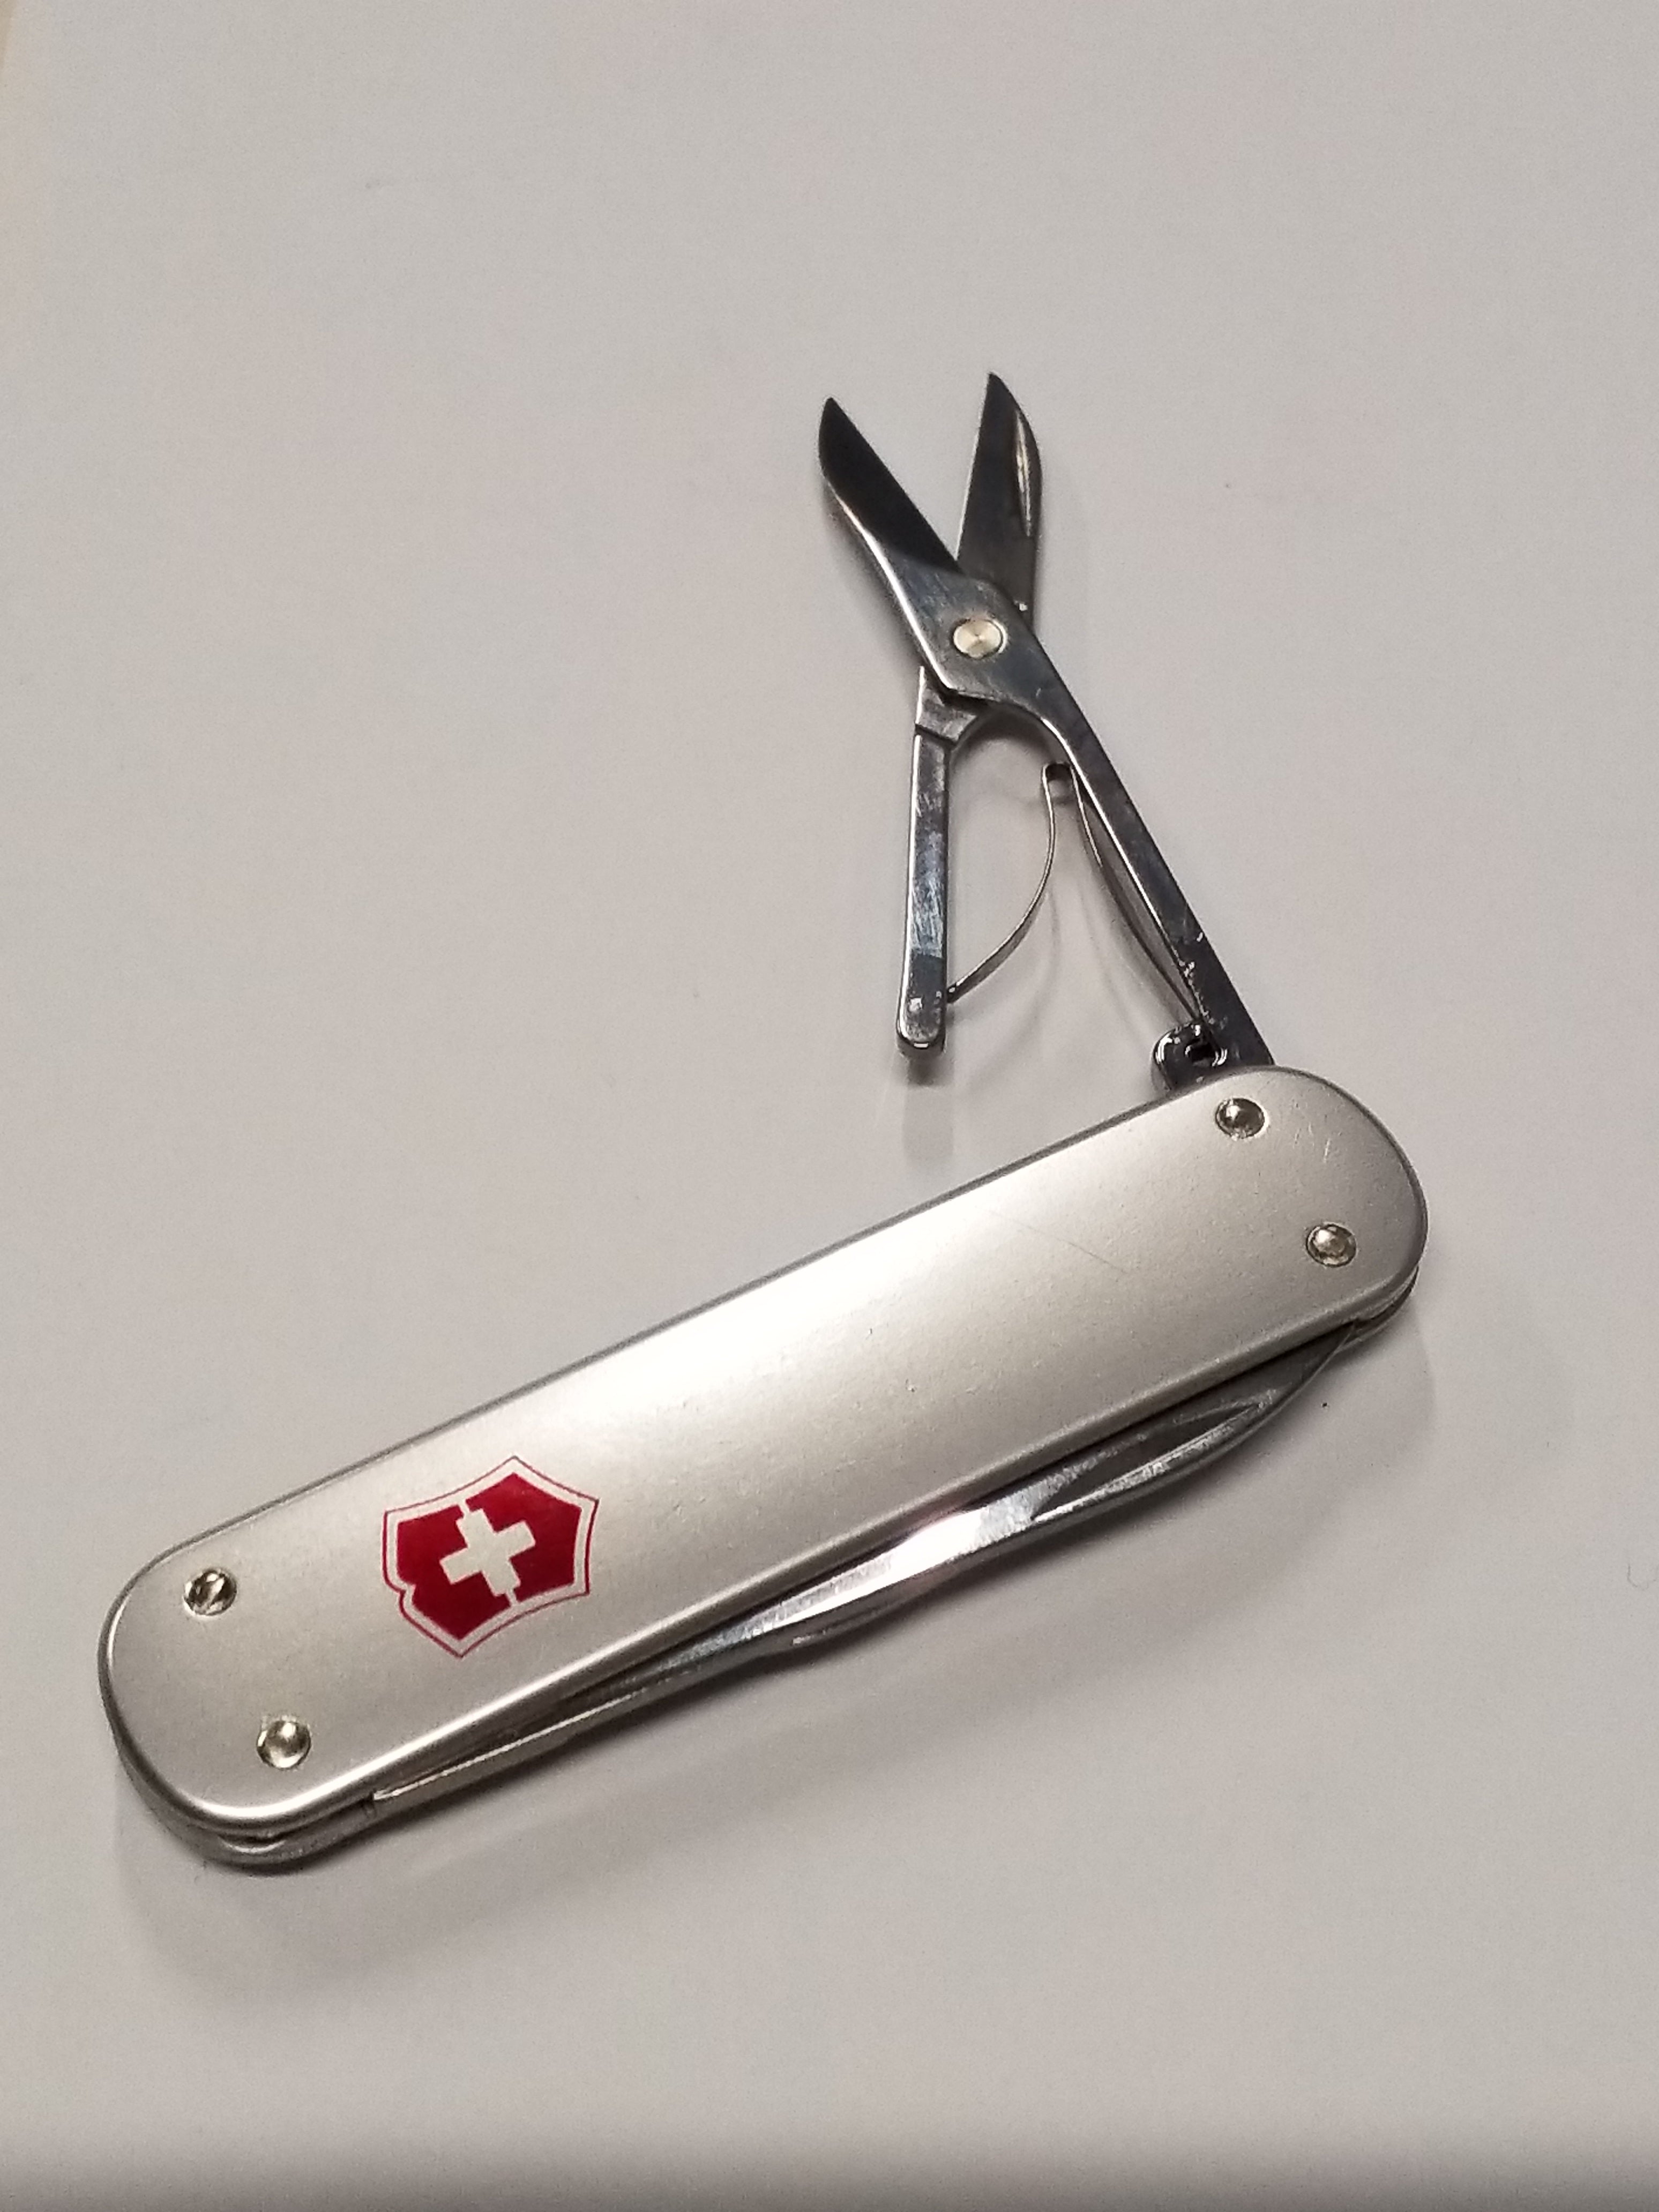 Swiss Army Knife - Money Clip - Alox - Silver - 5 Functions - 74mm - 0.8650.16